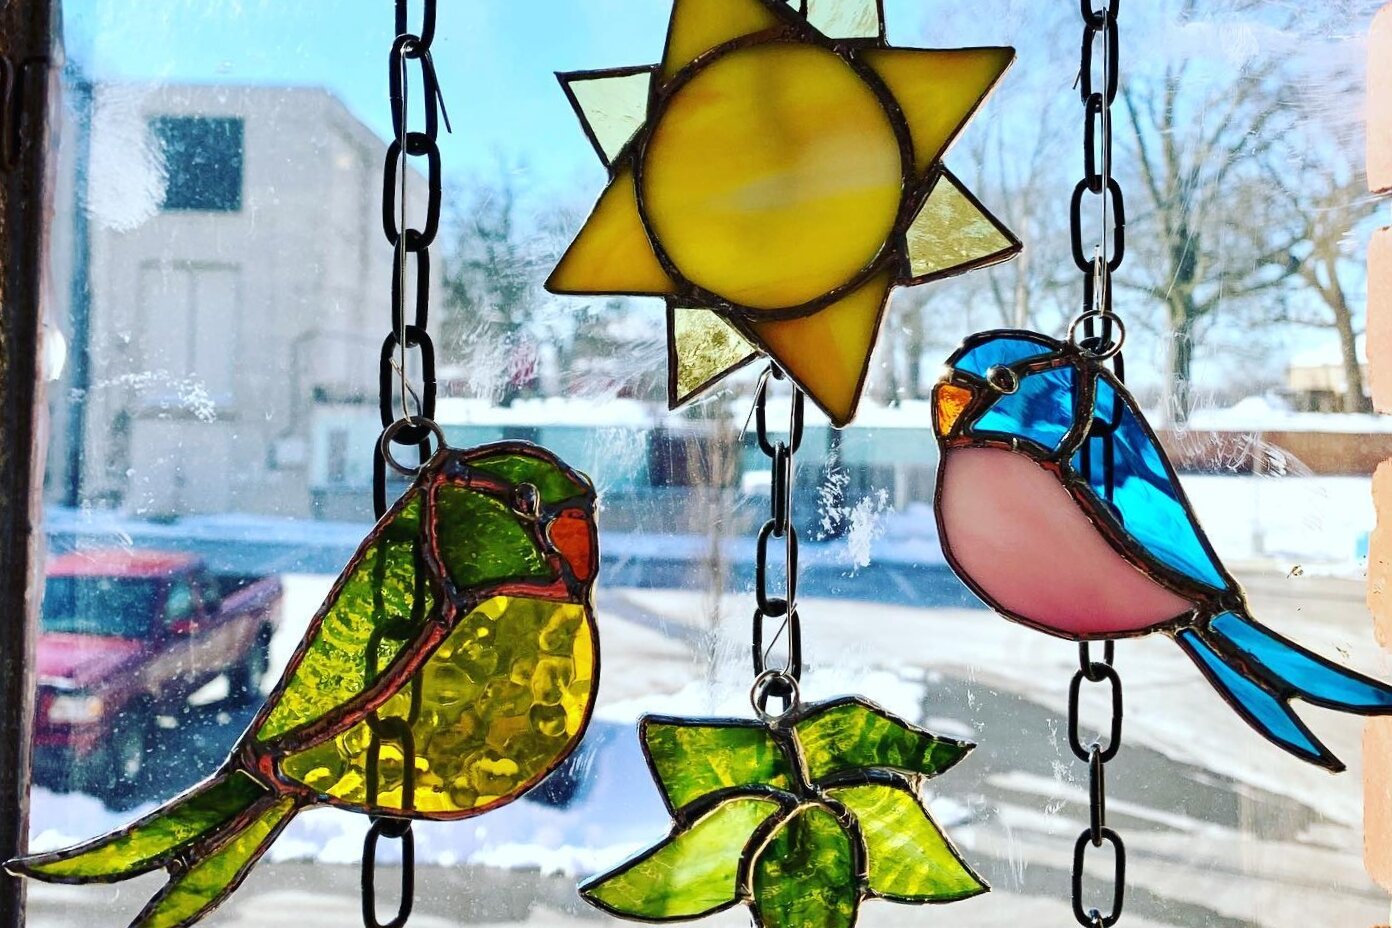 The windows of the Dee's Glass Designs studio in the Hatch Artist Studio building feature a rotating mix of stained glass art created by owner Dee Strozdas.